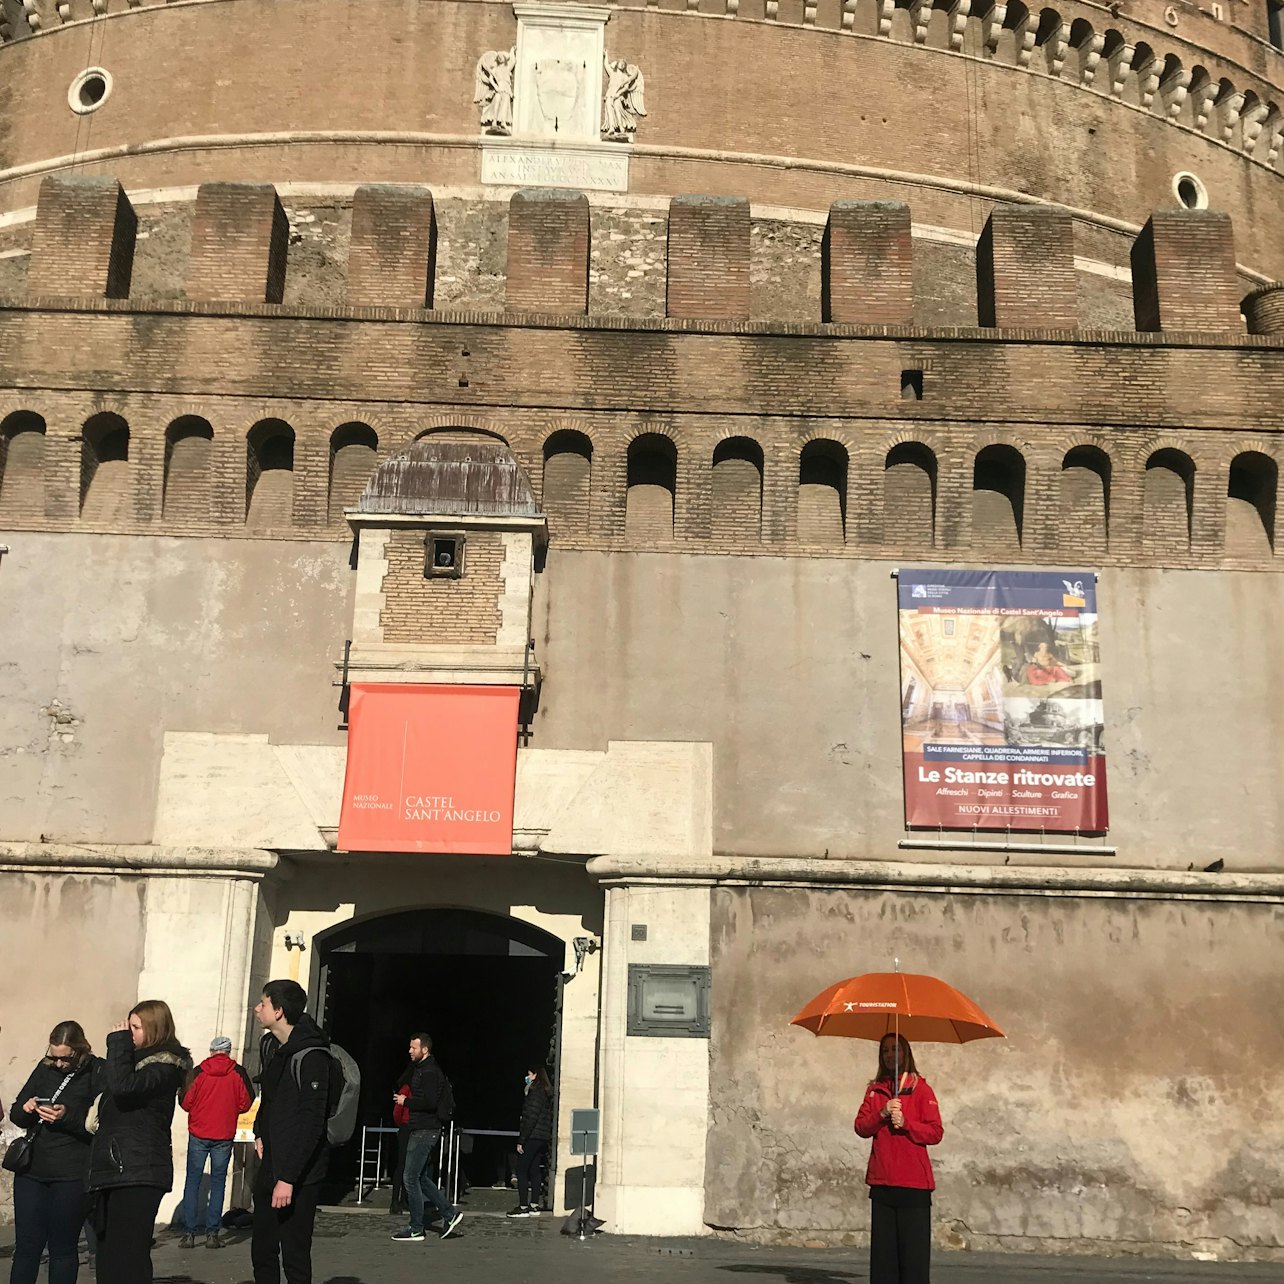 Castel Sant'Angelo: Entry Ticket + Audio Guide